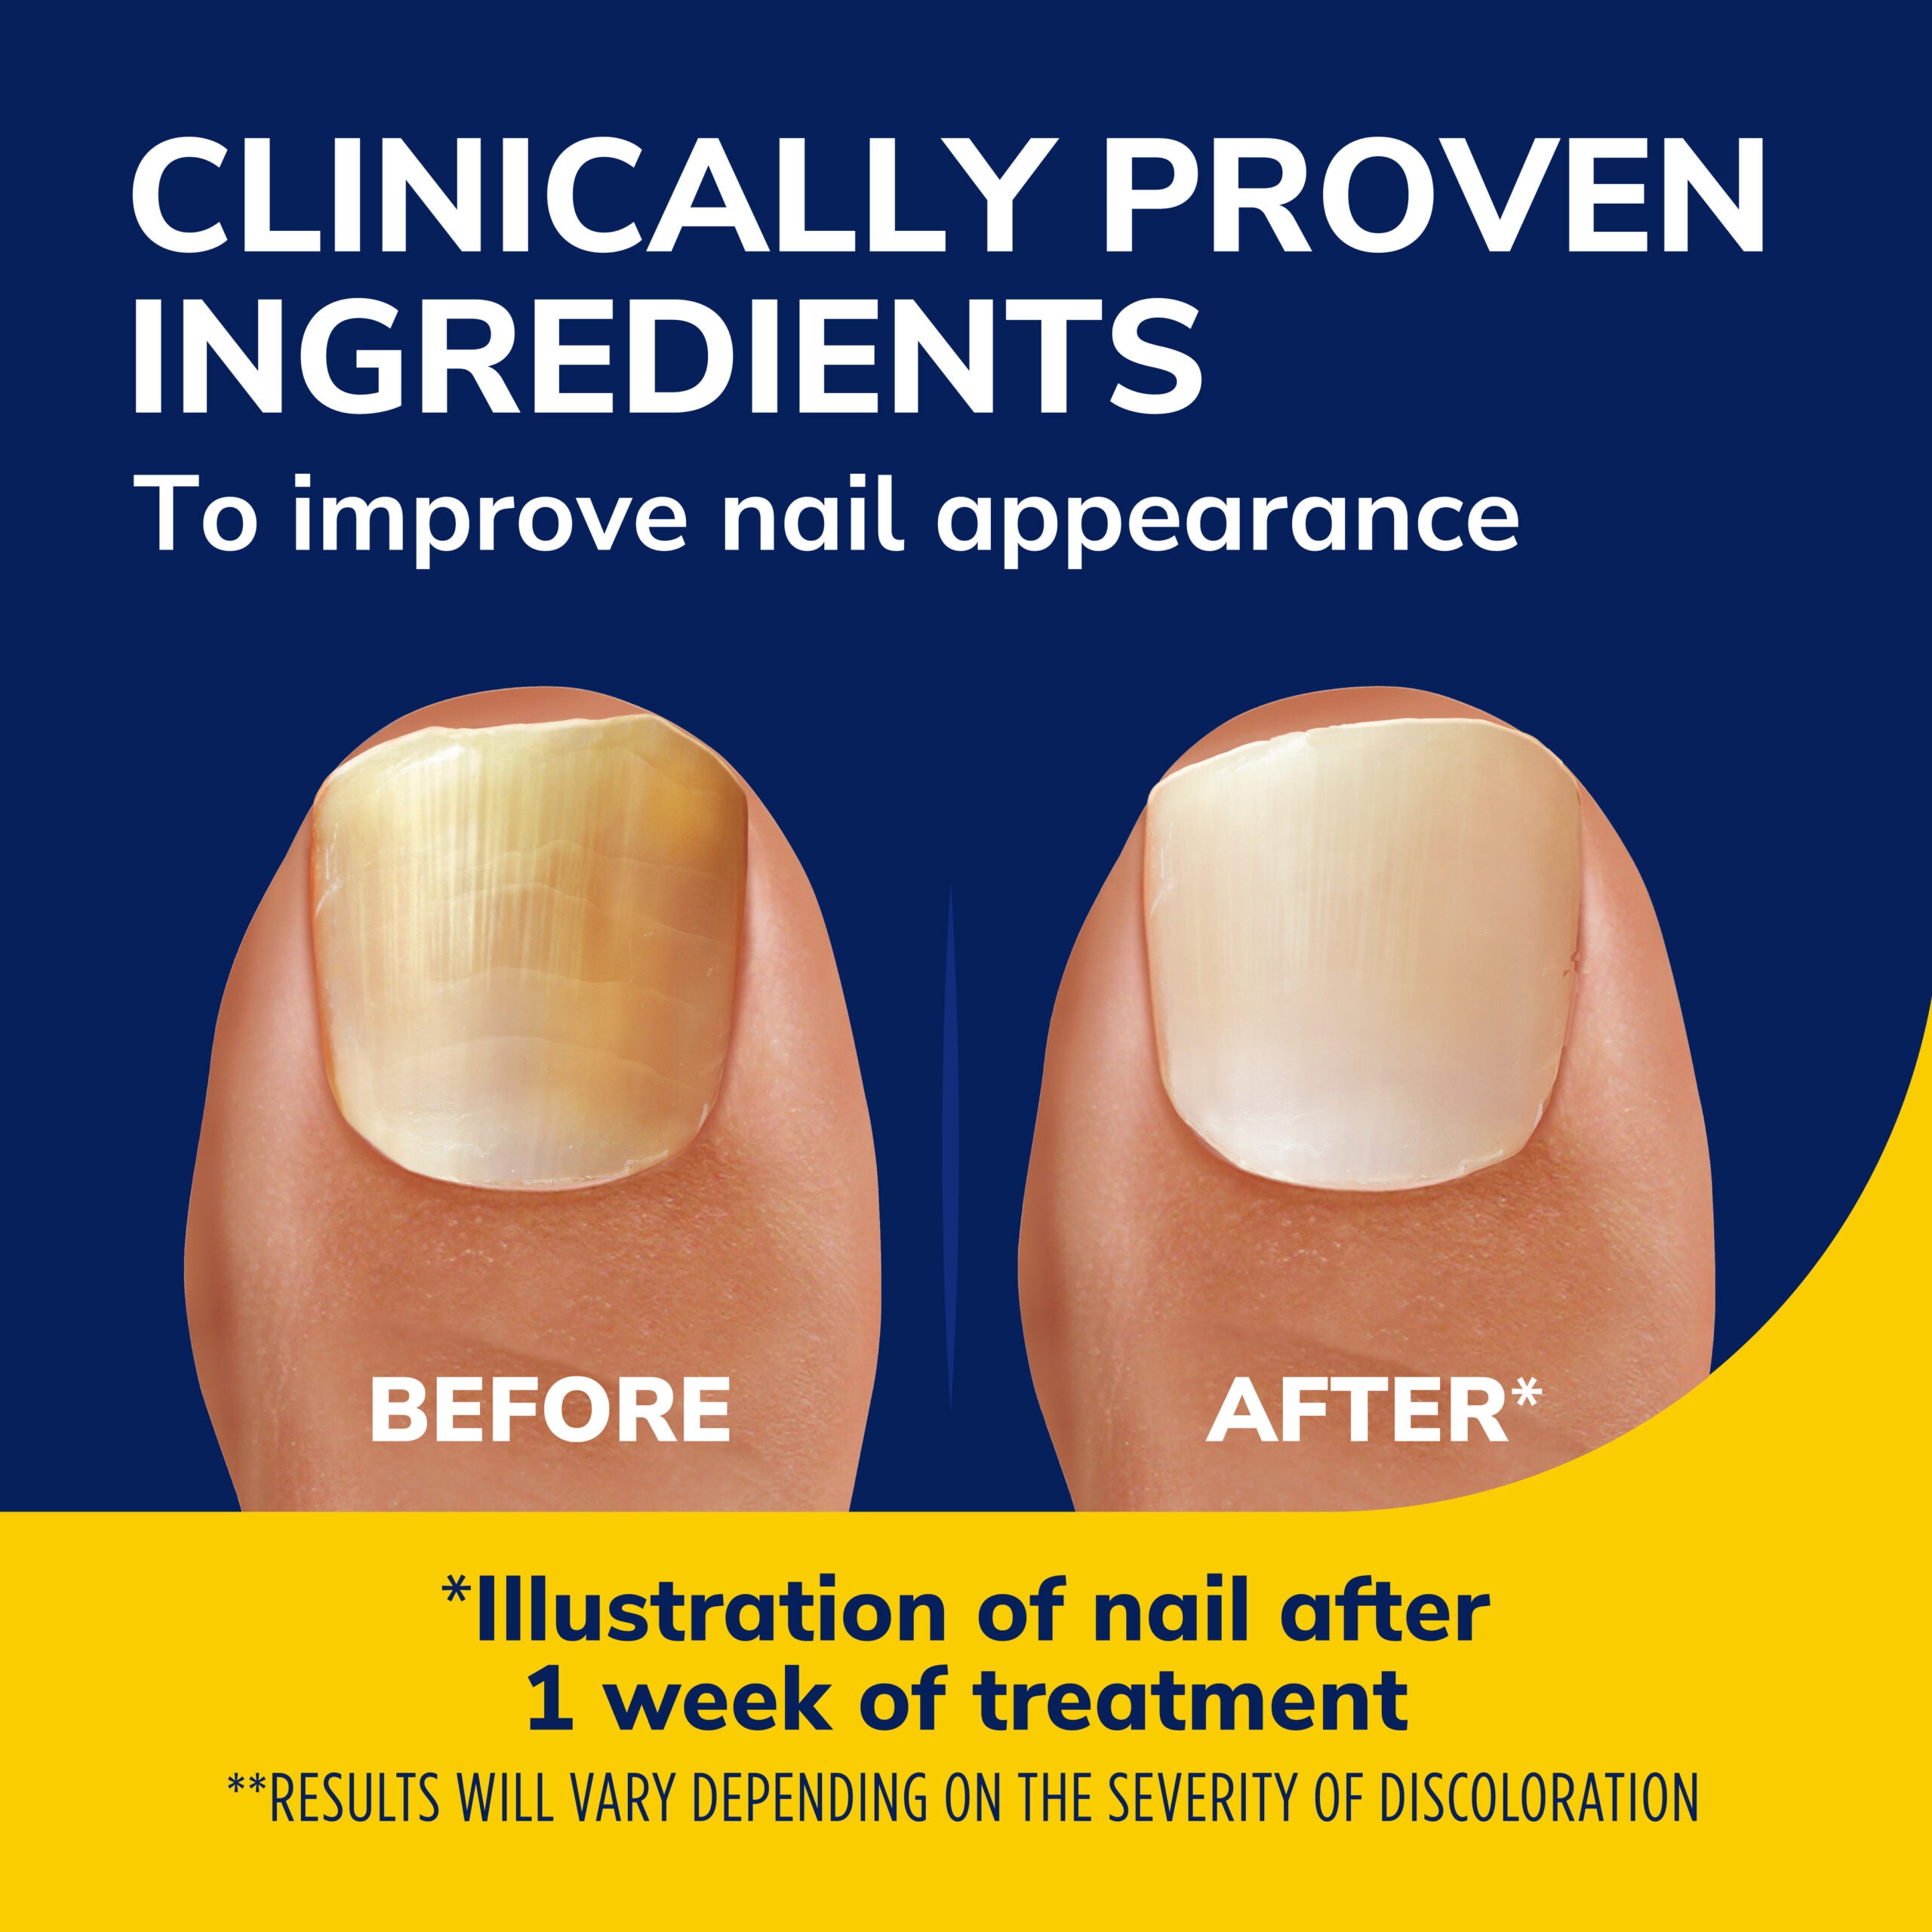 Nail fungus | NCH Healthcare System